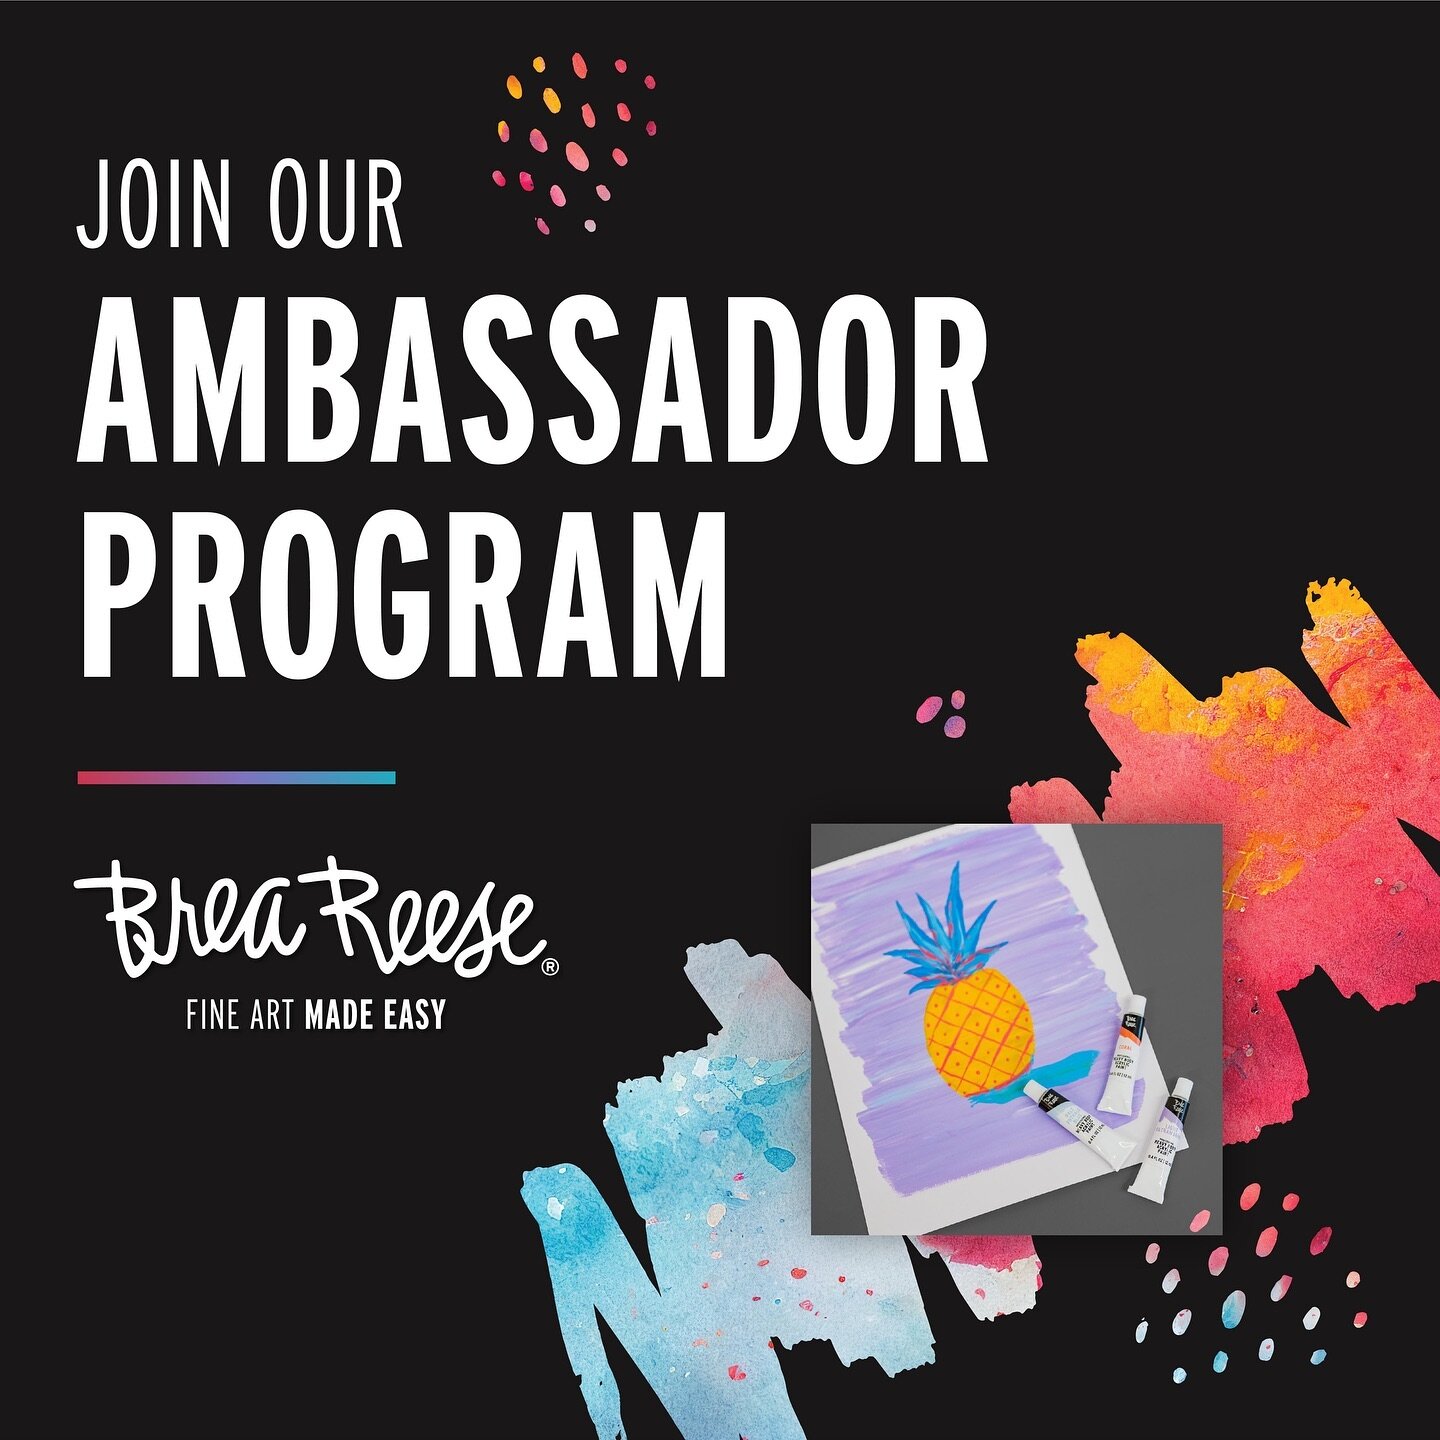 Calling all artists, crafters, and art therapy advocates! We want to work with you! Apply here to be the first to try out our new products, and get discounts, deals, and MORE!